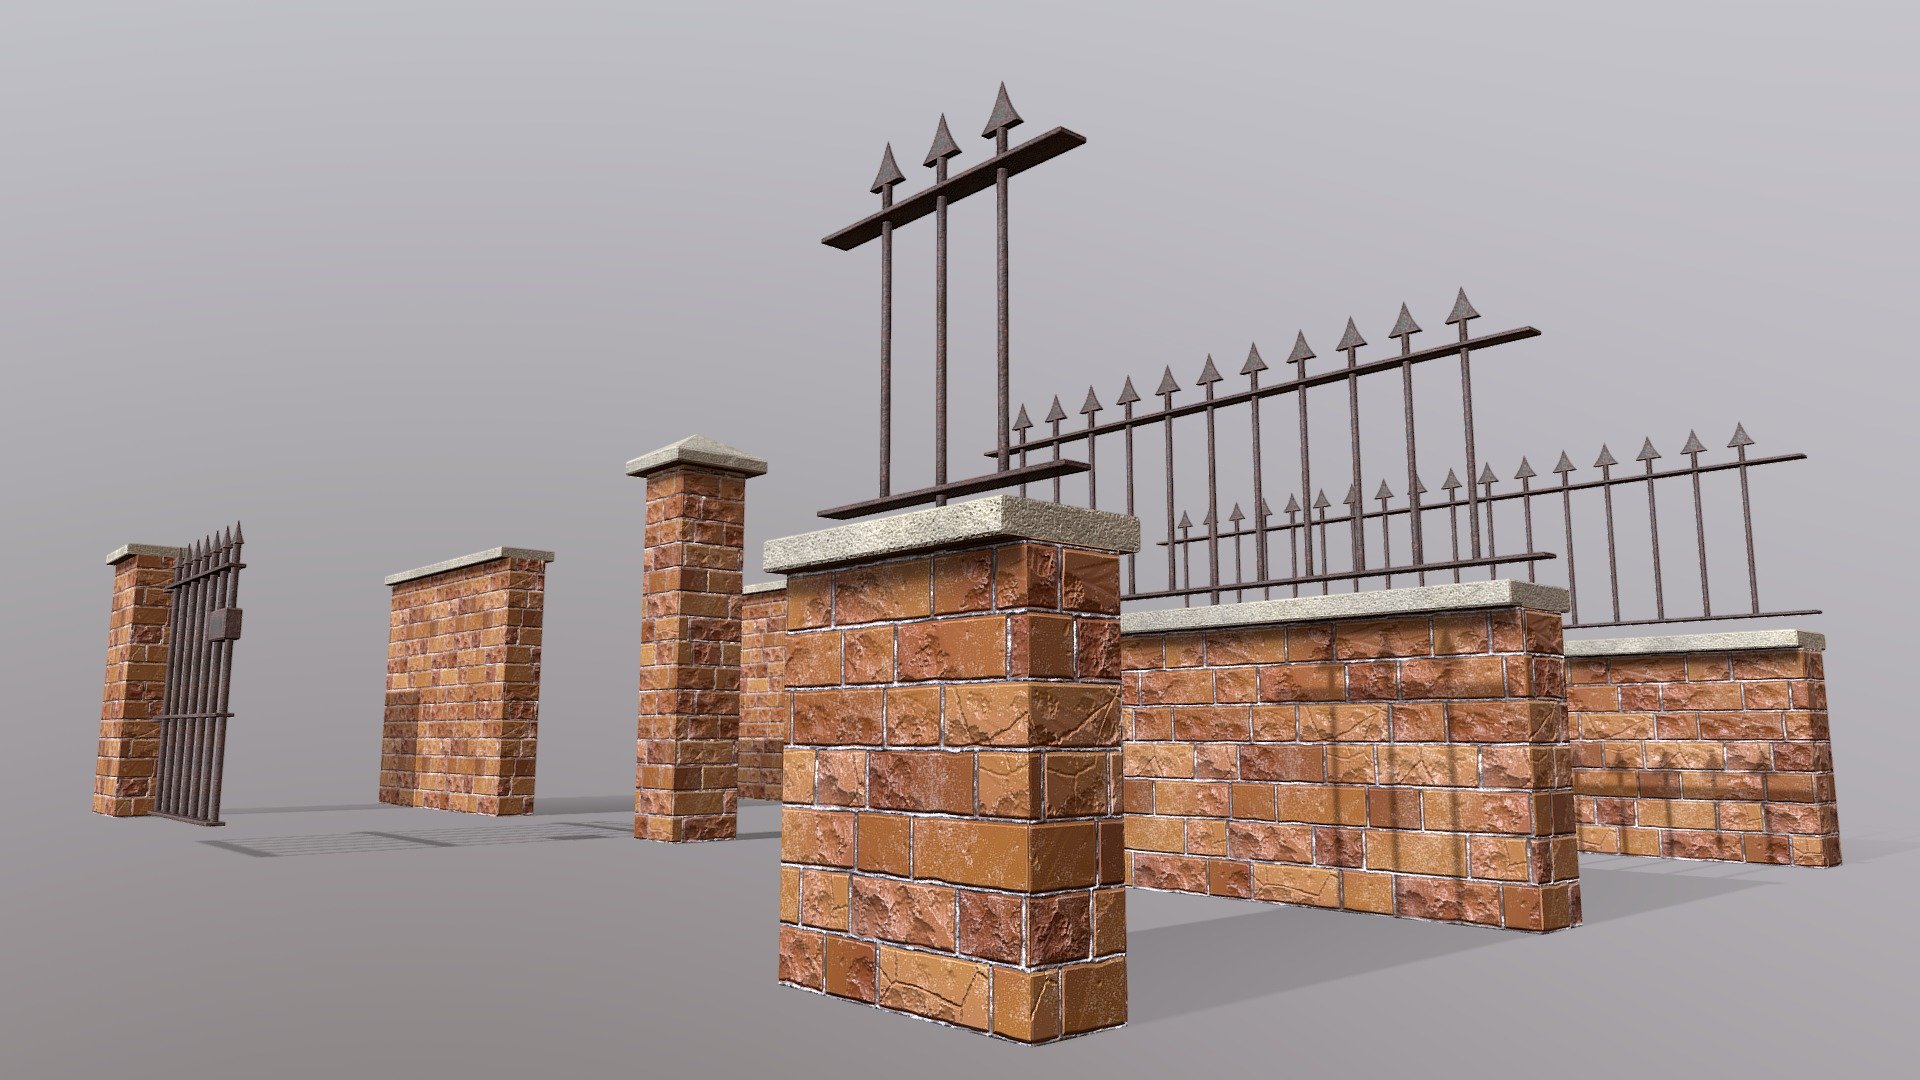 Fully Modular Brick Wall Pack for games and animations. The model is game ready and compatible with game engines. 

It can be used to create a garden wall, fence or a boundary wall for realistic games.

TWO variations of the wall are included.

The package contains 4K (4096x4096) PBR textures which are highly detailed HD.

Specific PBR maps for the following  game engines are included in separate files:


Unity
Unreal
PBR - Metal Rough

The package contains 8 Individual modular pieces that can be arranged in any desired formation.

Pieces included:


3 sizes of wall with wrought iron fence.
3 sizes of taller wall
1 pillar.
1 small metal gate.

Total polycount - 2,215 polygons - 2,568 Vertices (Low-Poly)

The 3d model is properly UV mapped with non-overlapping and optimised UV's for a better texel density.  

Create and build your own PC &amp; mobile environments using our PBR Modular Fence Pack 3d model